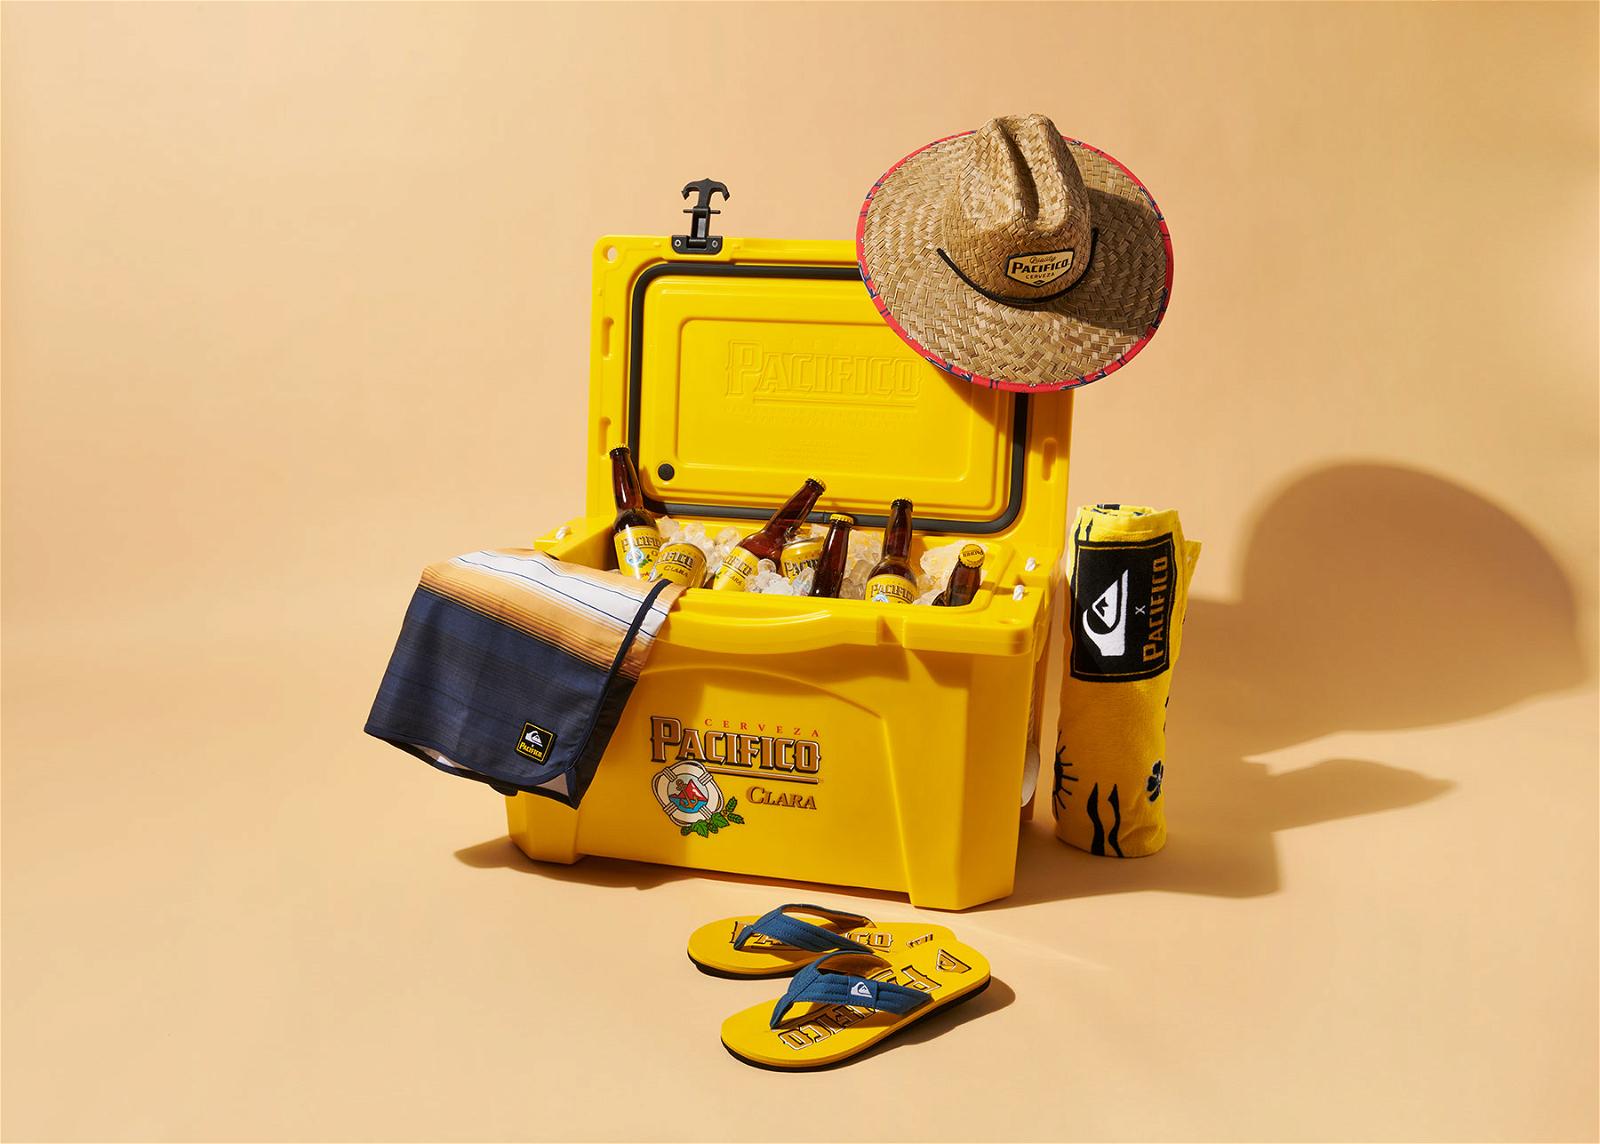 Quiksilver x Pacifico collection